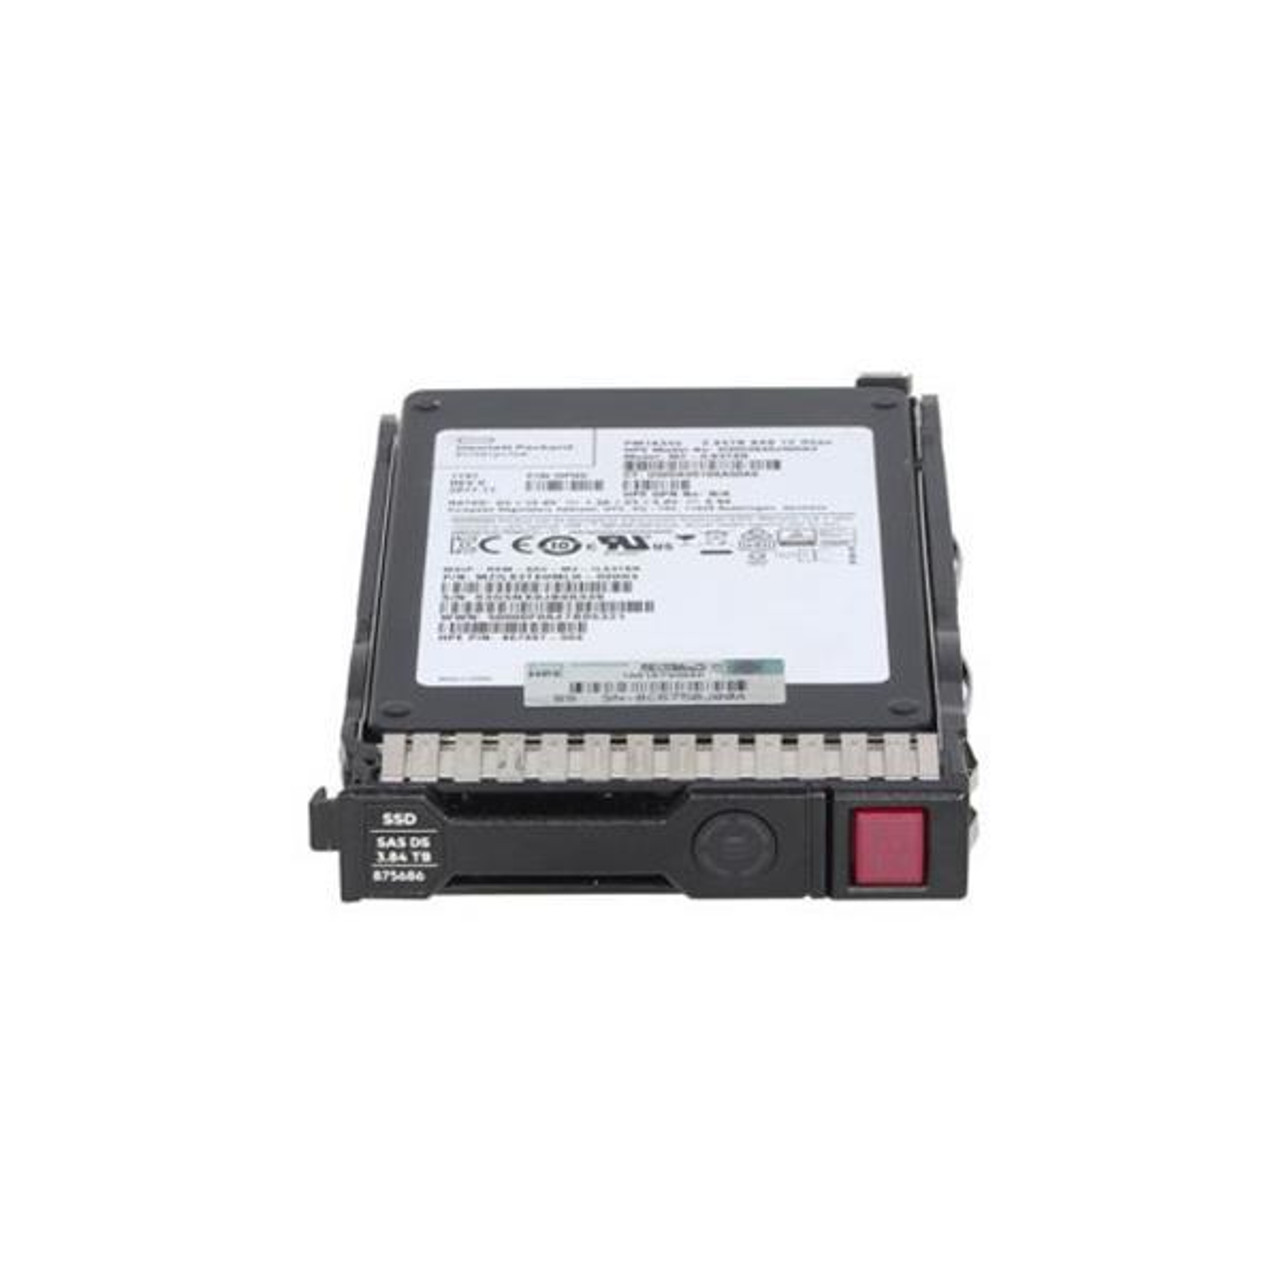 P26306-B21 HPE 3.84TB SAS 12Gbps Read Intensive 2.5-inch Internal Solid State Drive (SSD)